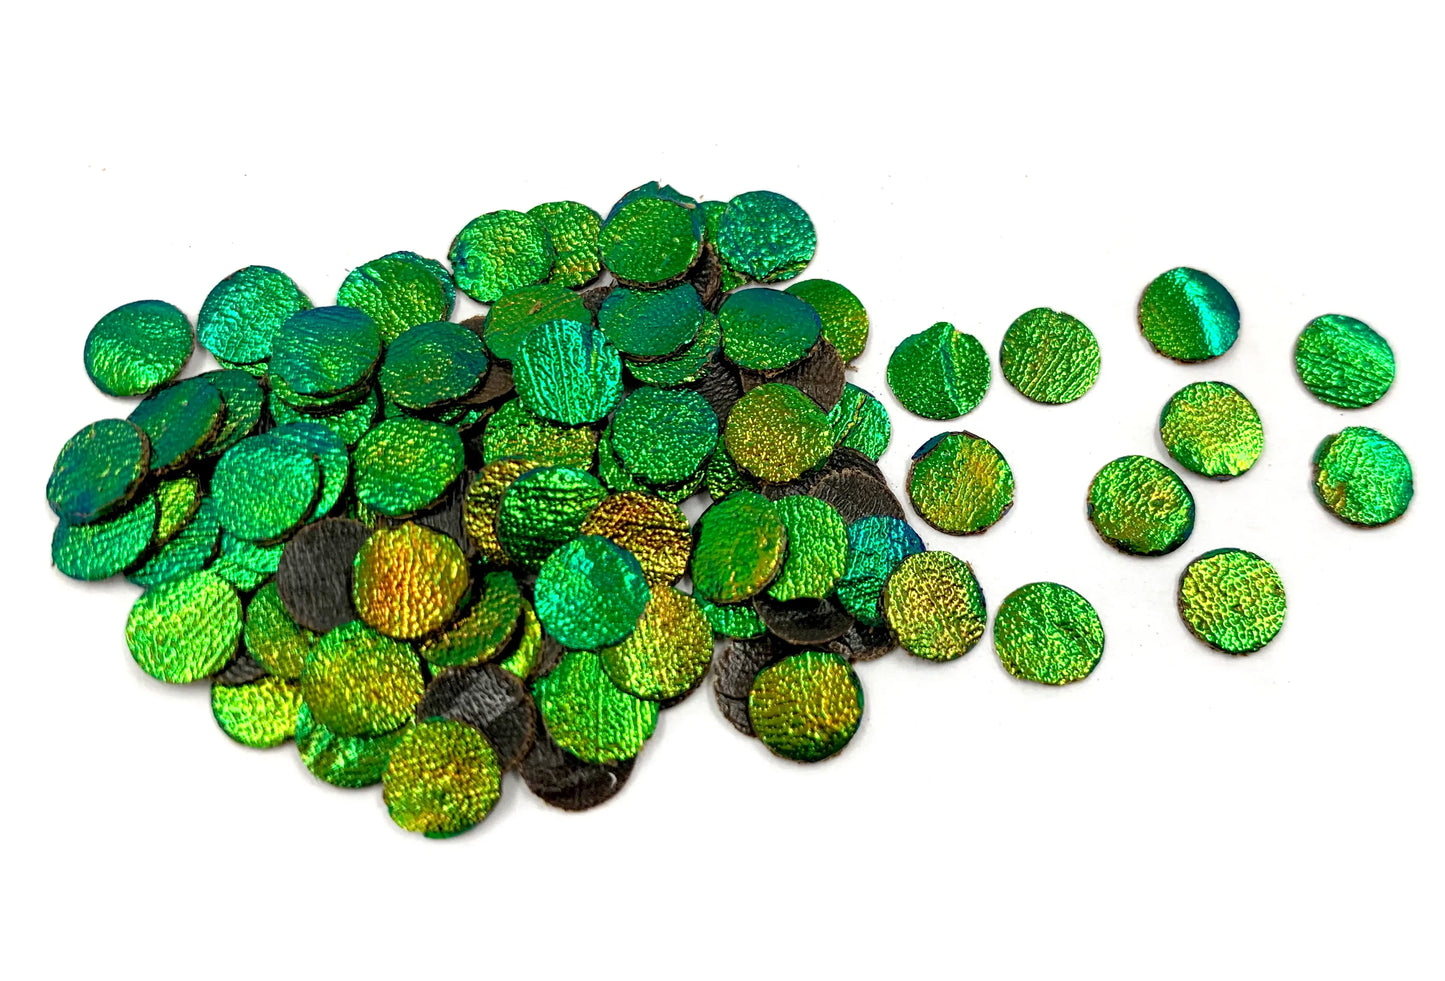 Jewel Beetle Wings UNDRILLED NO-HOLE 100 Pcs Natural Wings - Circle 5 MM